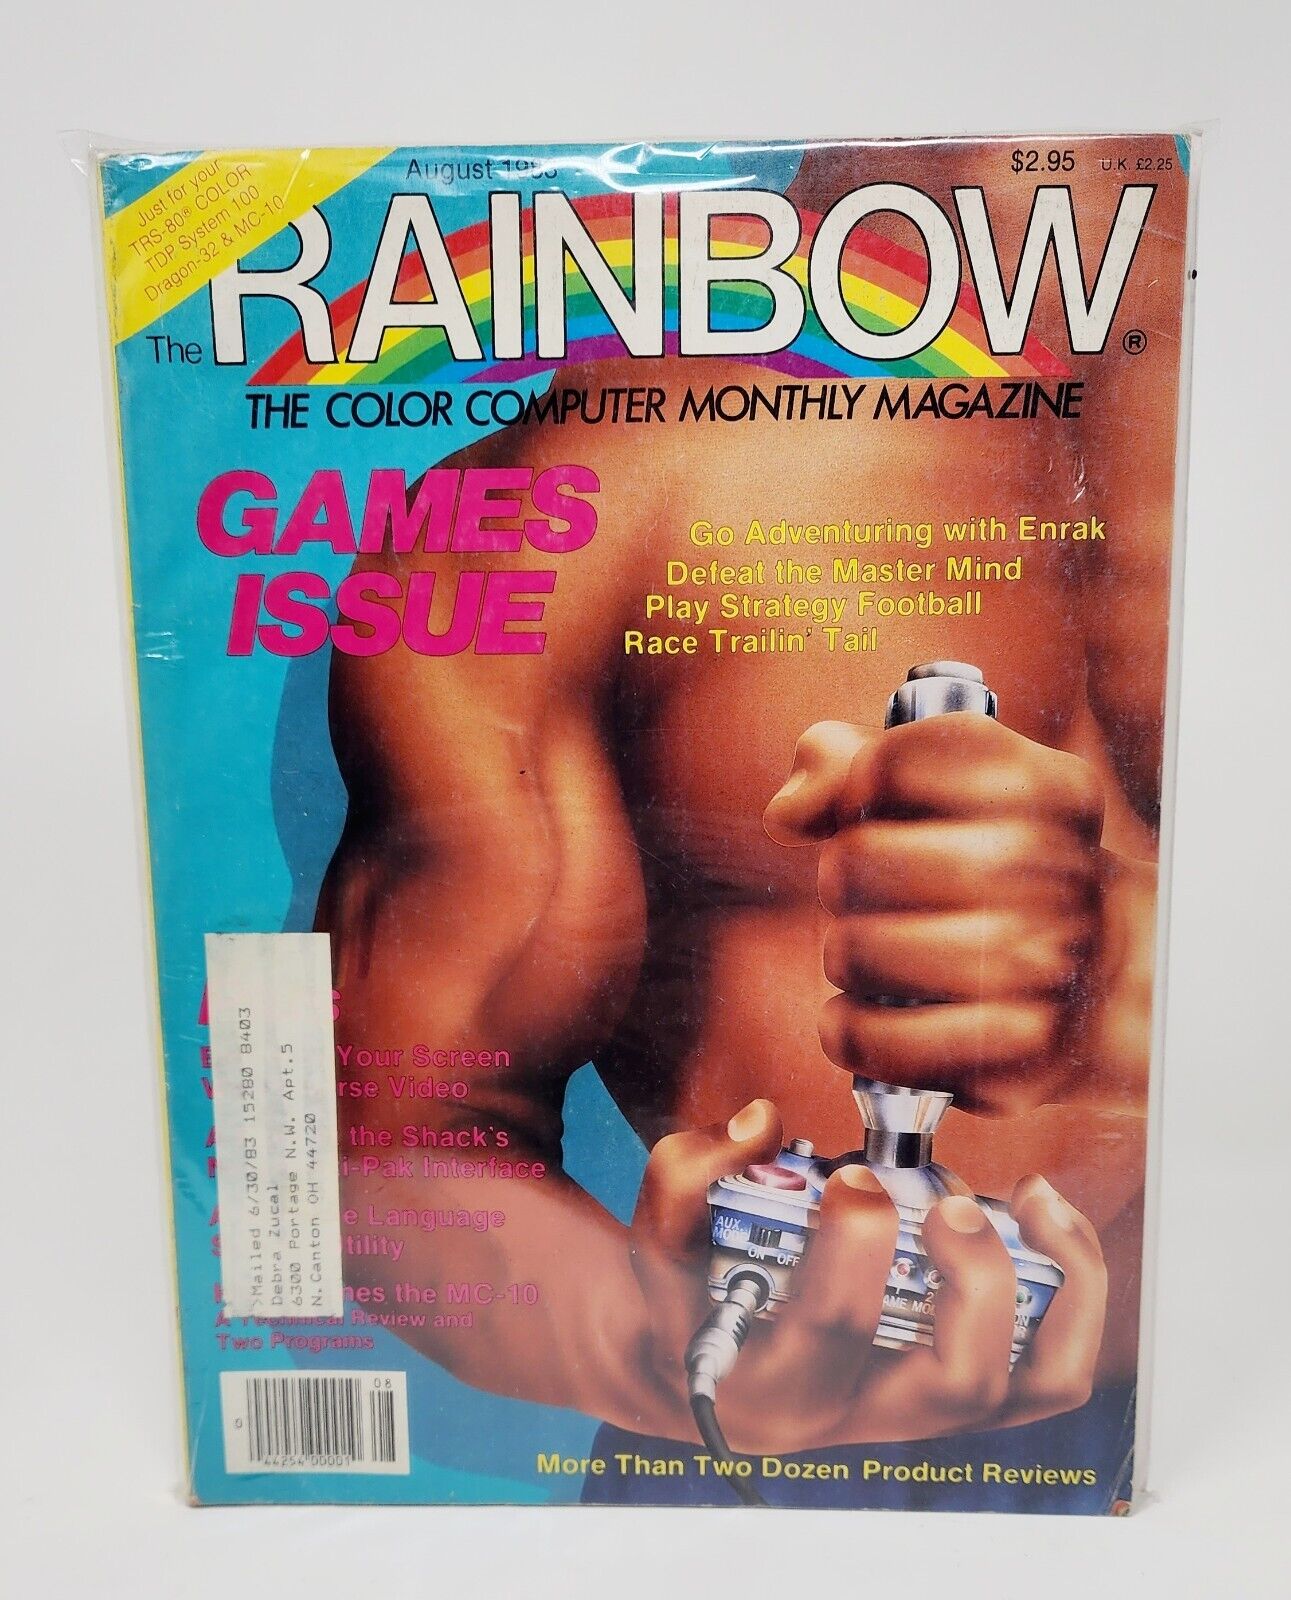 Vintage Tandy Rainbow The color Computer Magazine August 1983 the Games Issue